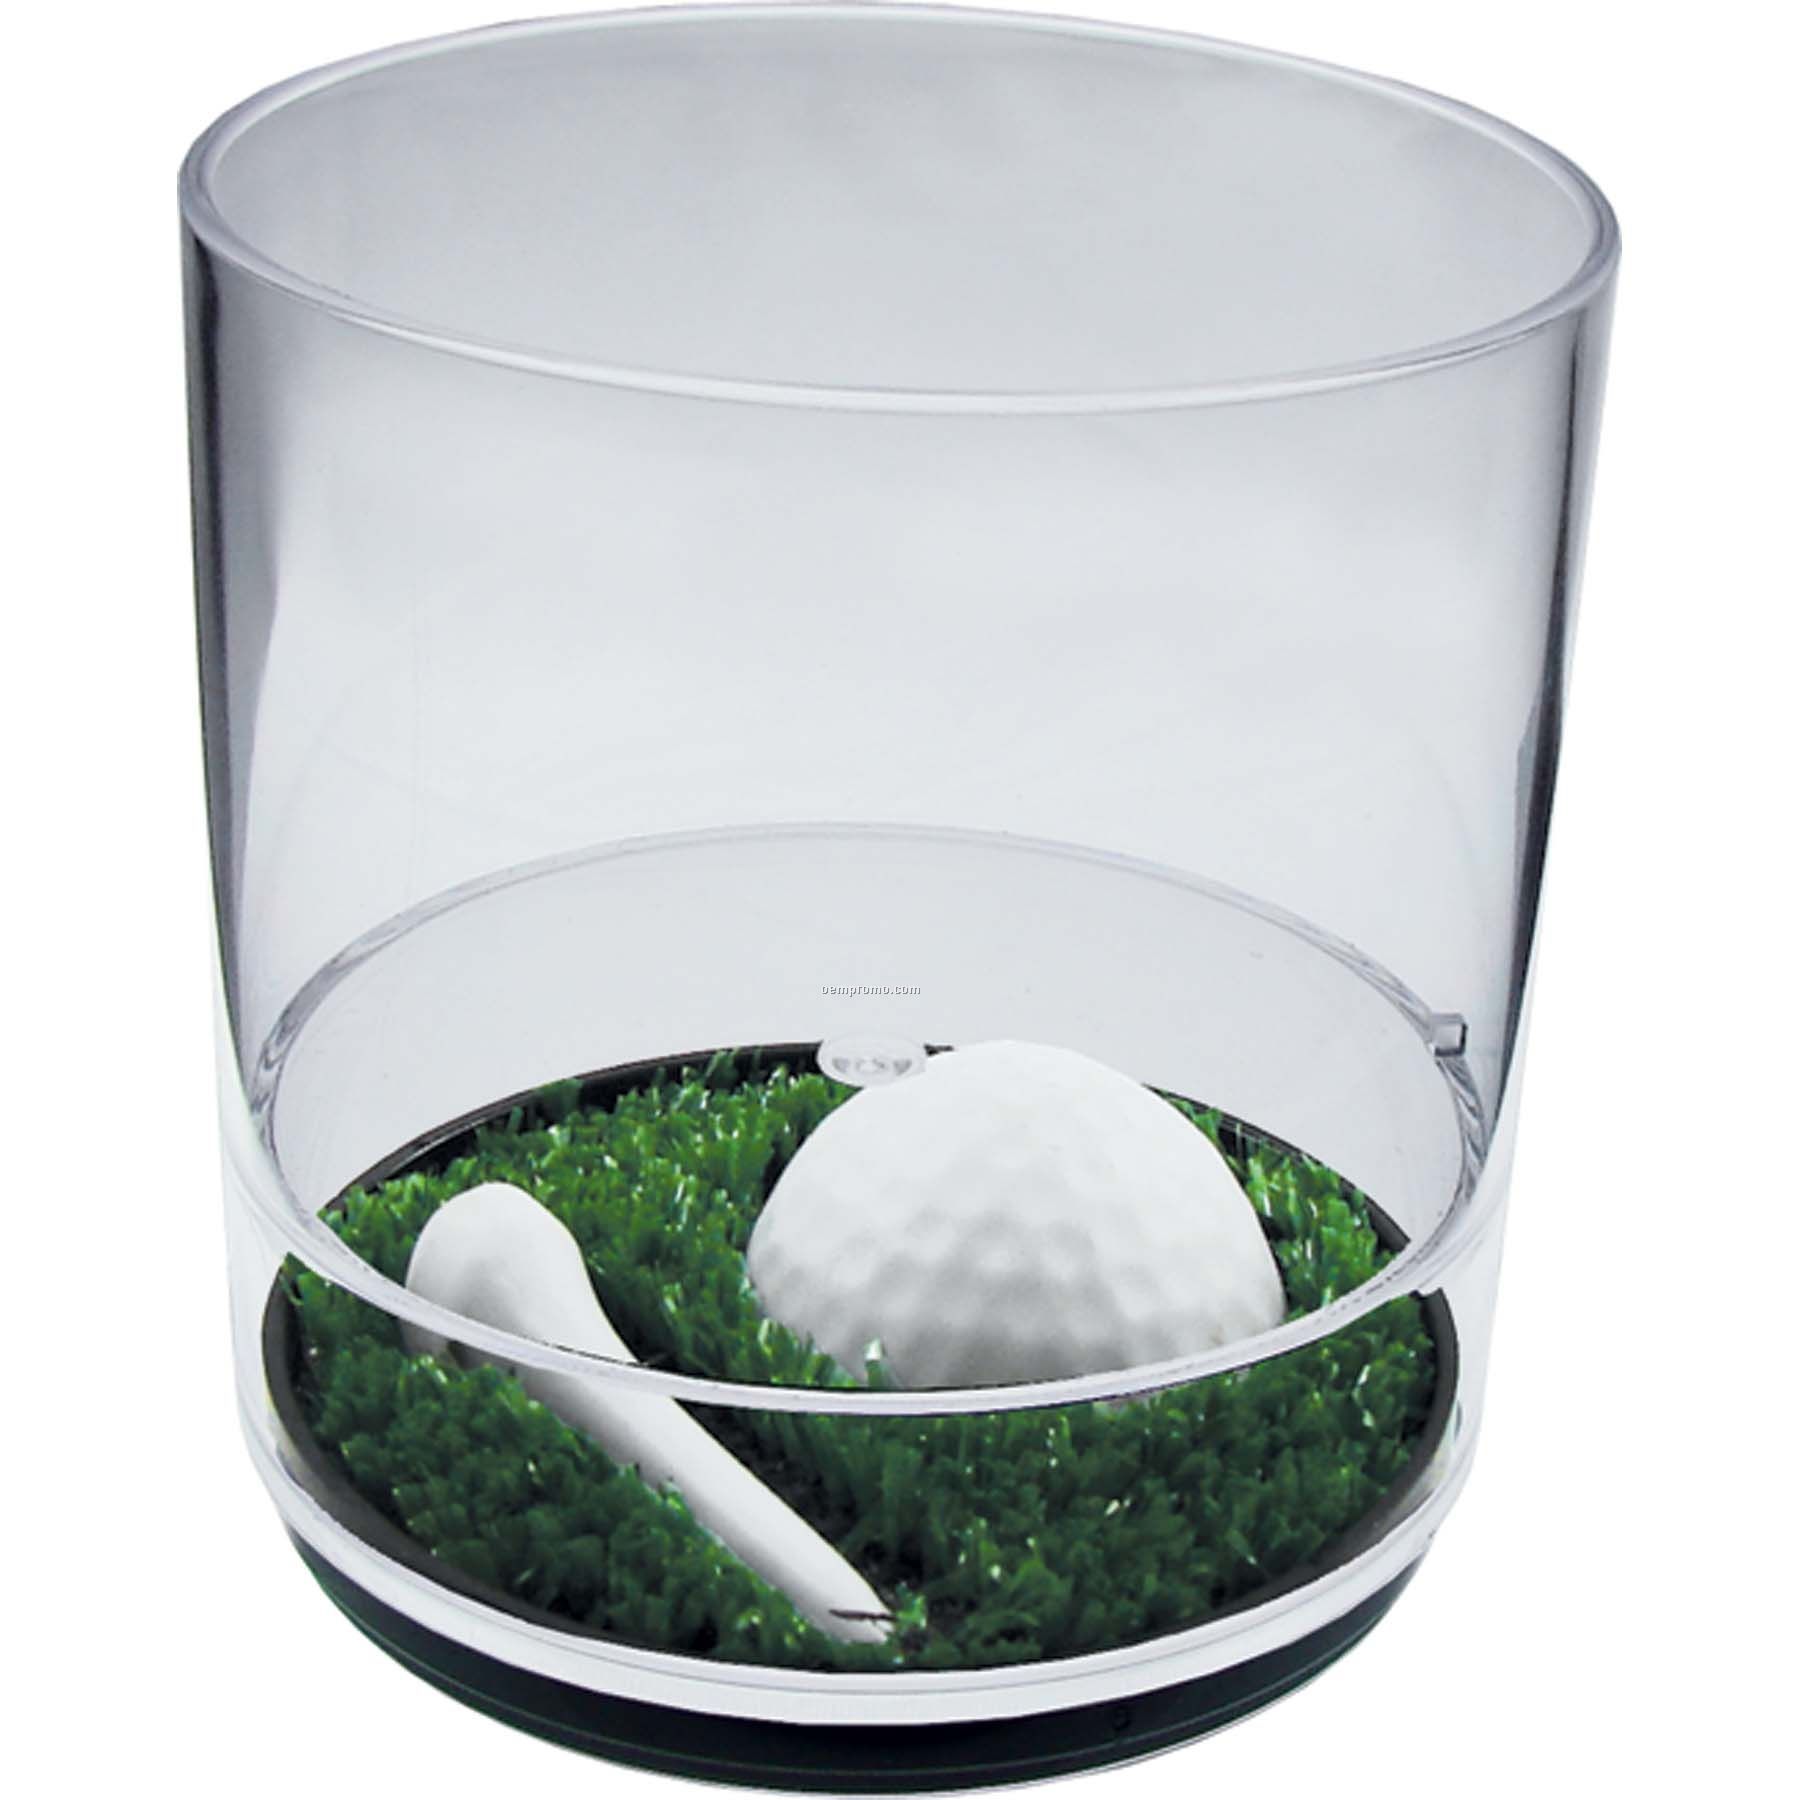 Tee It Up 12 Oz. Compartment Tumbler